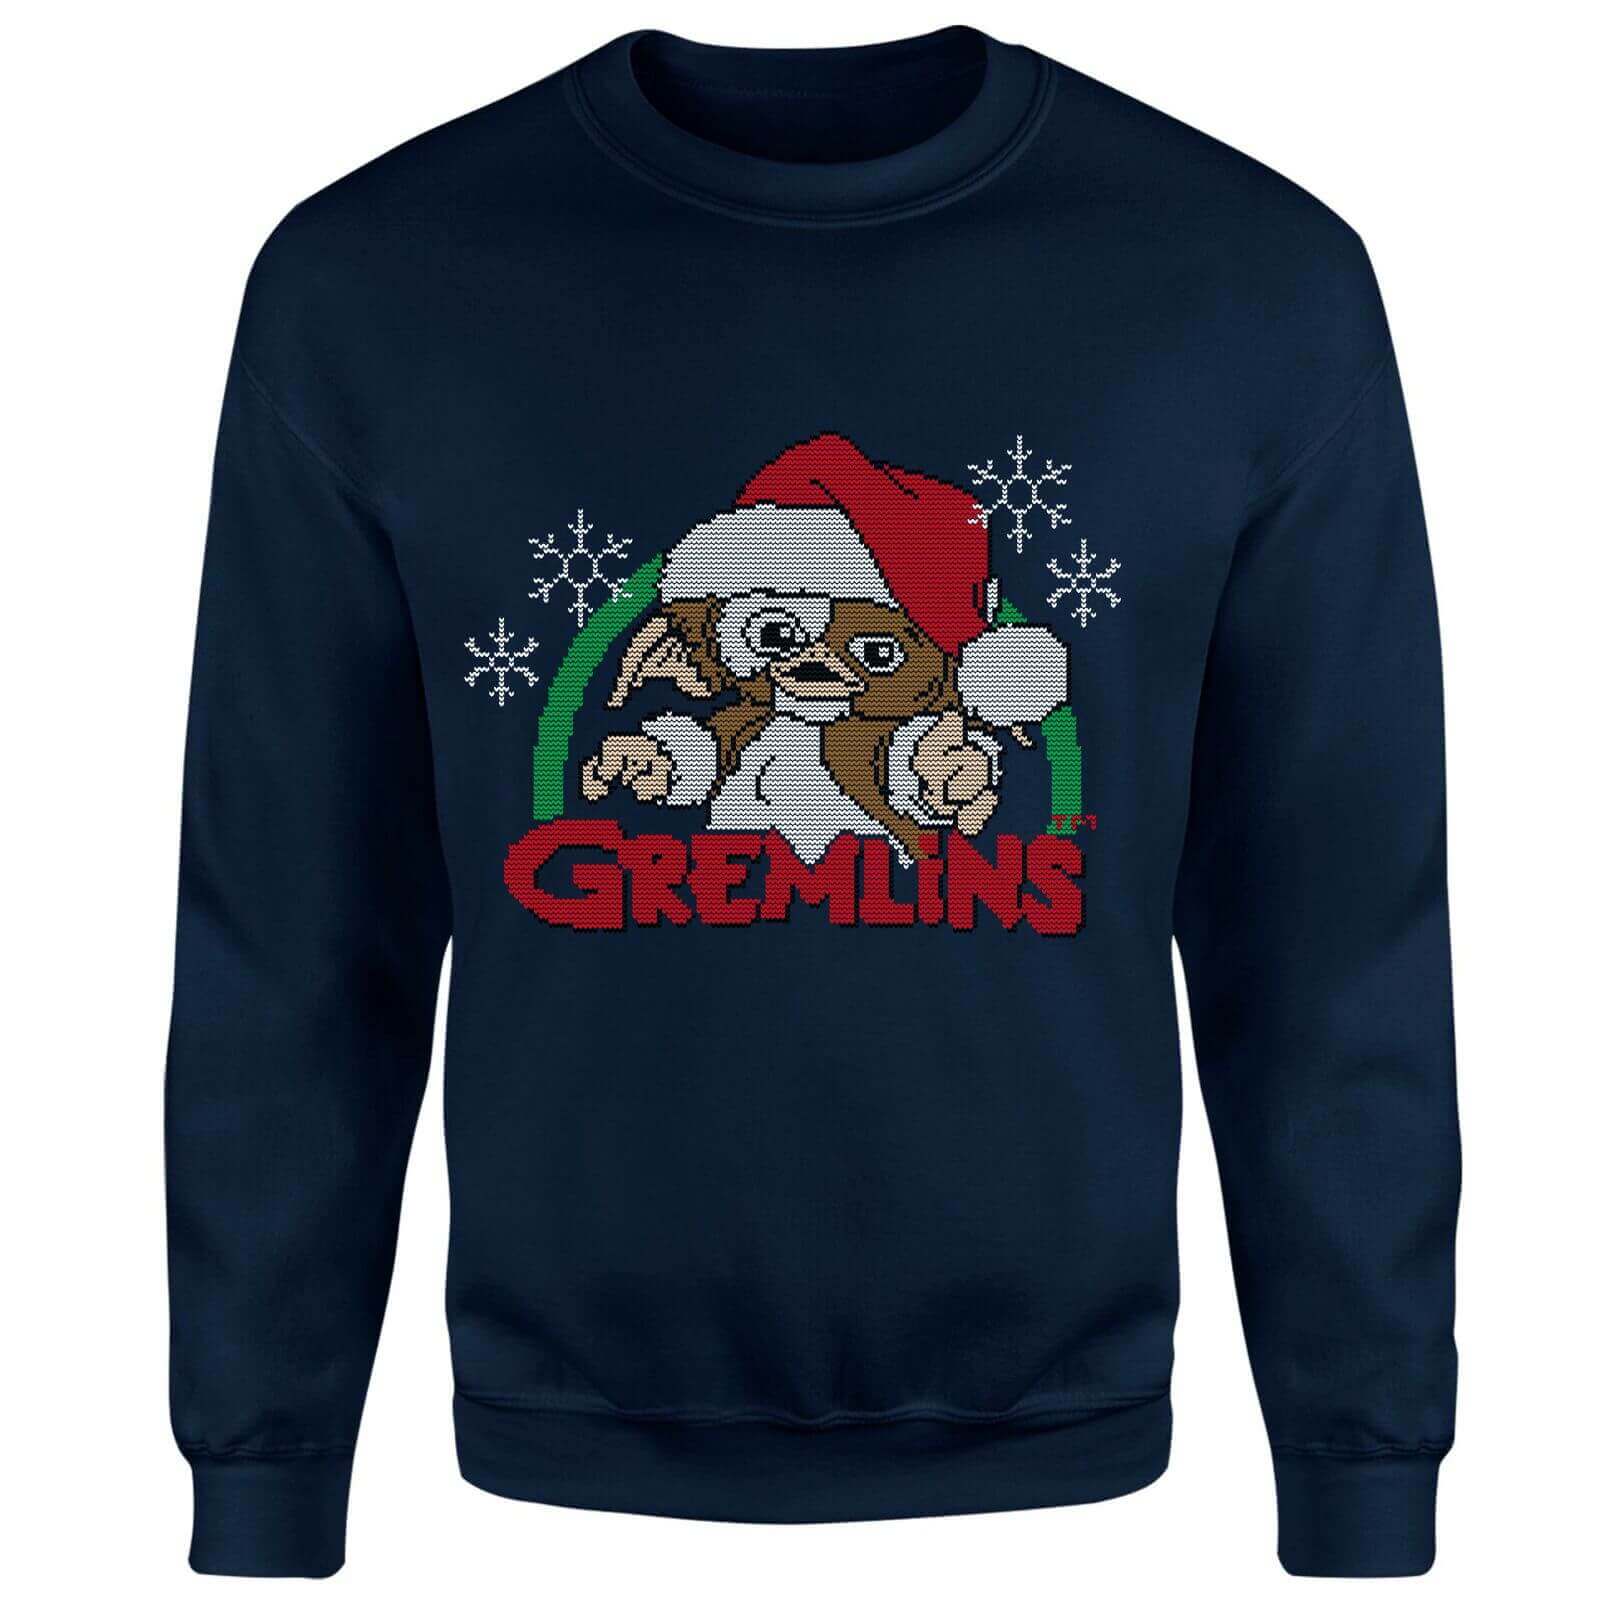 Gremlins Another Reason To Hate Christmas Jumper - Navy - XXL - Navy product